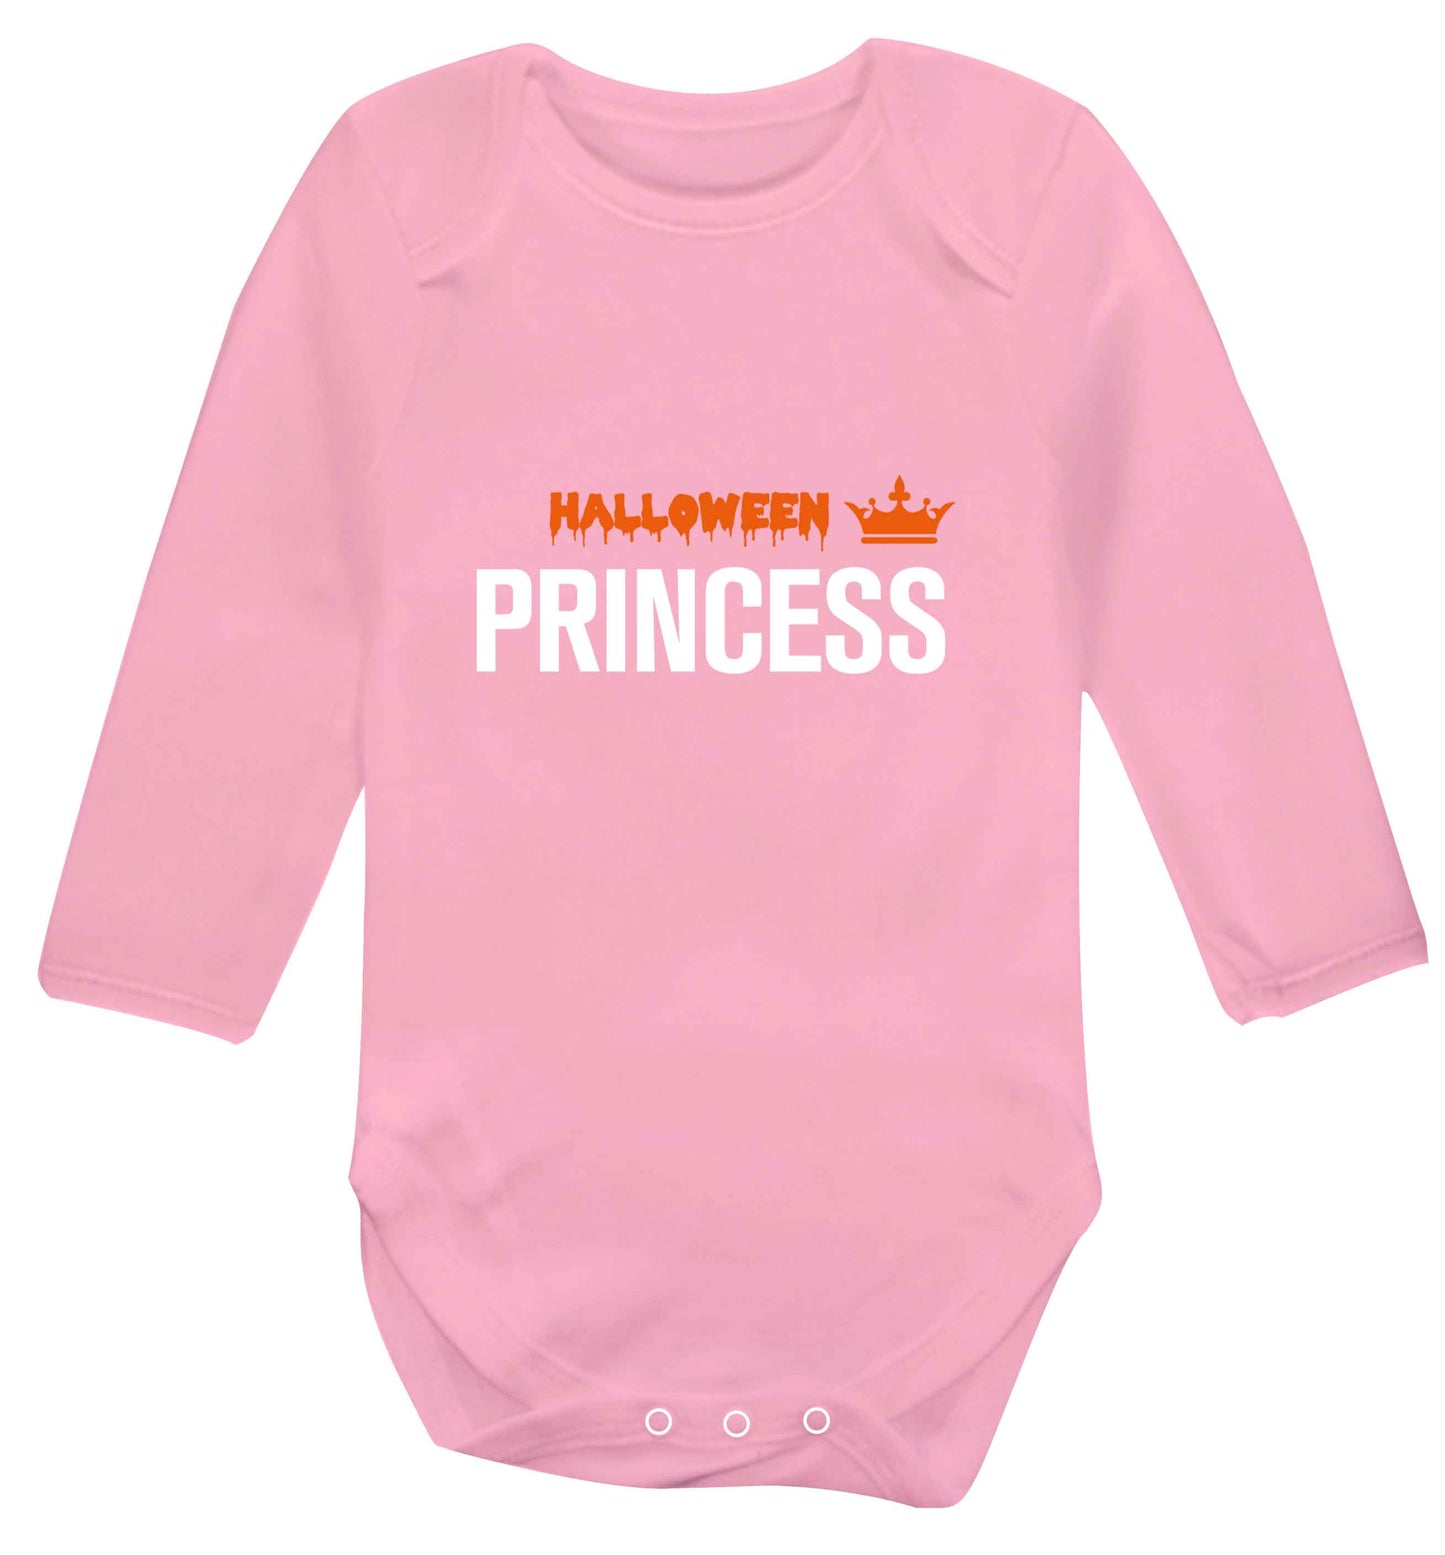 Halloween princess baby vest long sleeved pale pink 6-12 months